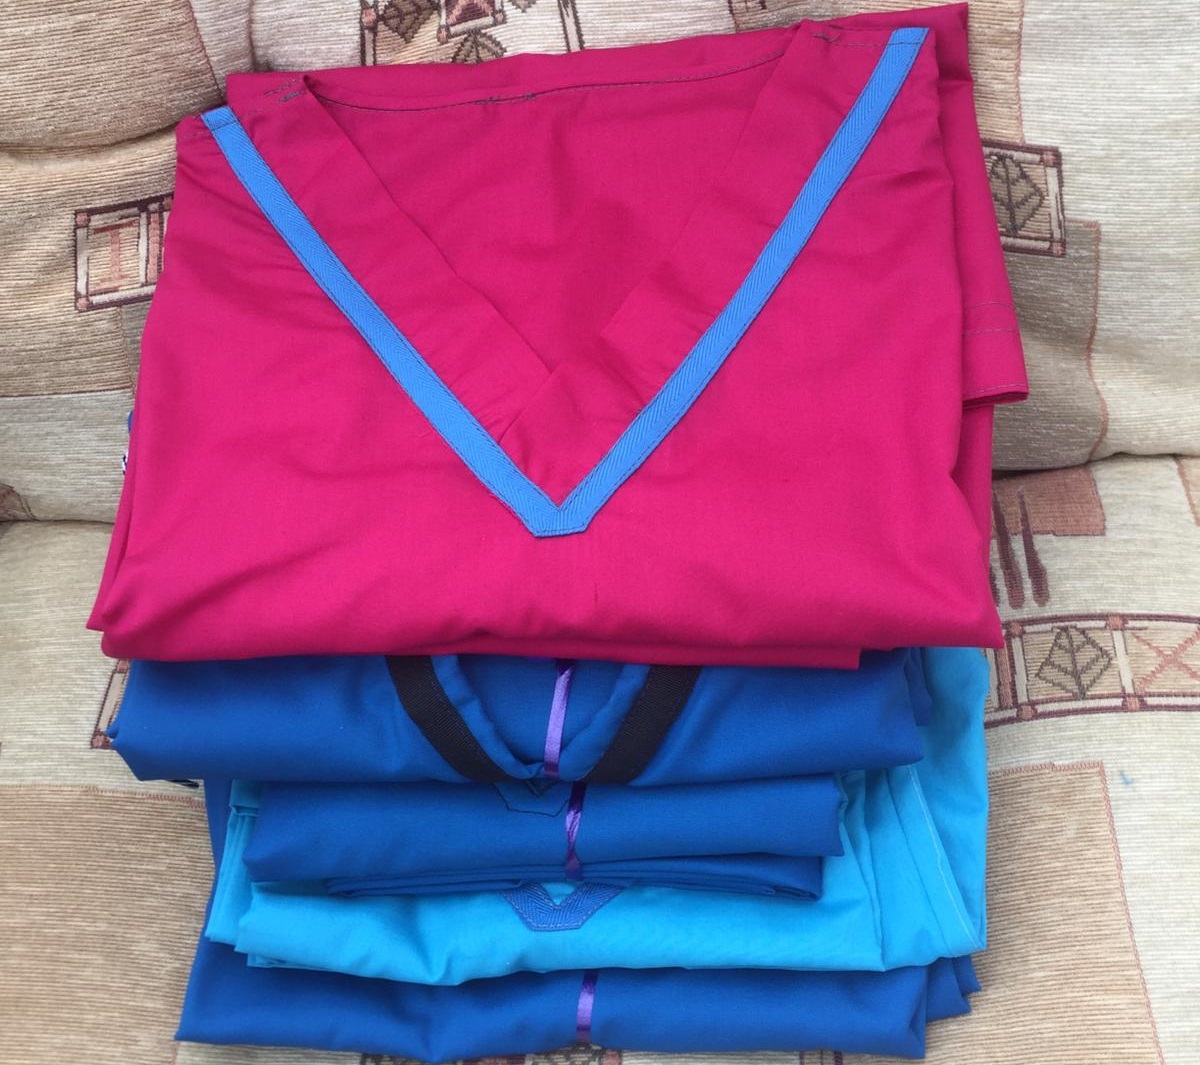 pile of folded scrubs in blue and bright pink colours